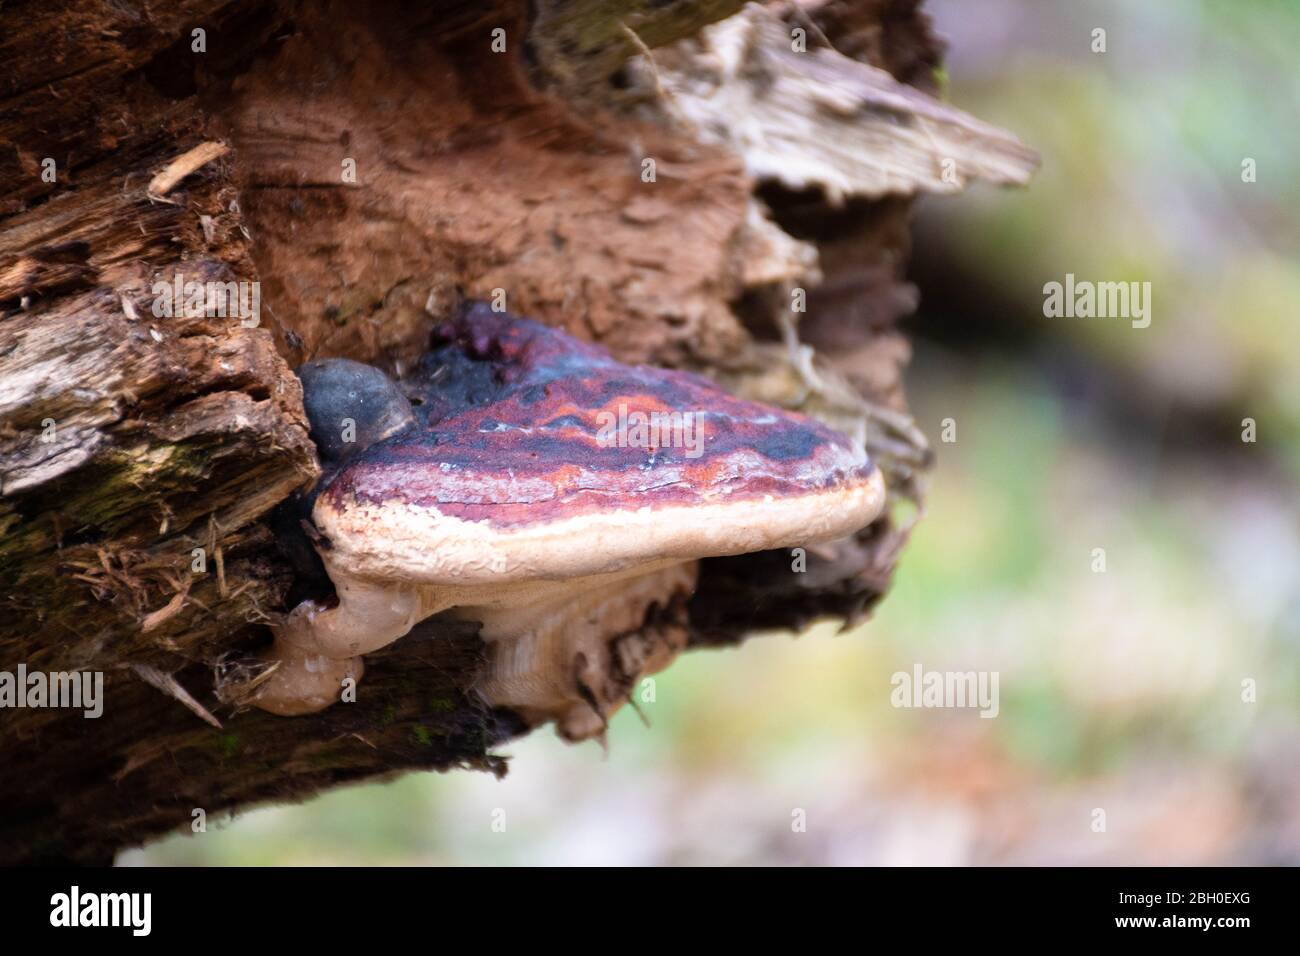 Mushroom on a trunk in a mossy forest. Smoky polypore or smoky bracket, species of fungus, plant pathogen that causes white rot in live trees Stock Photo